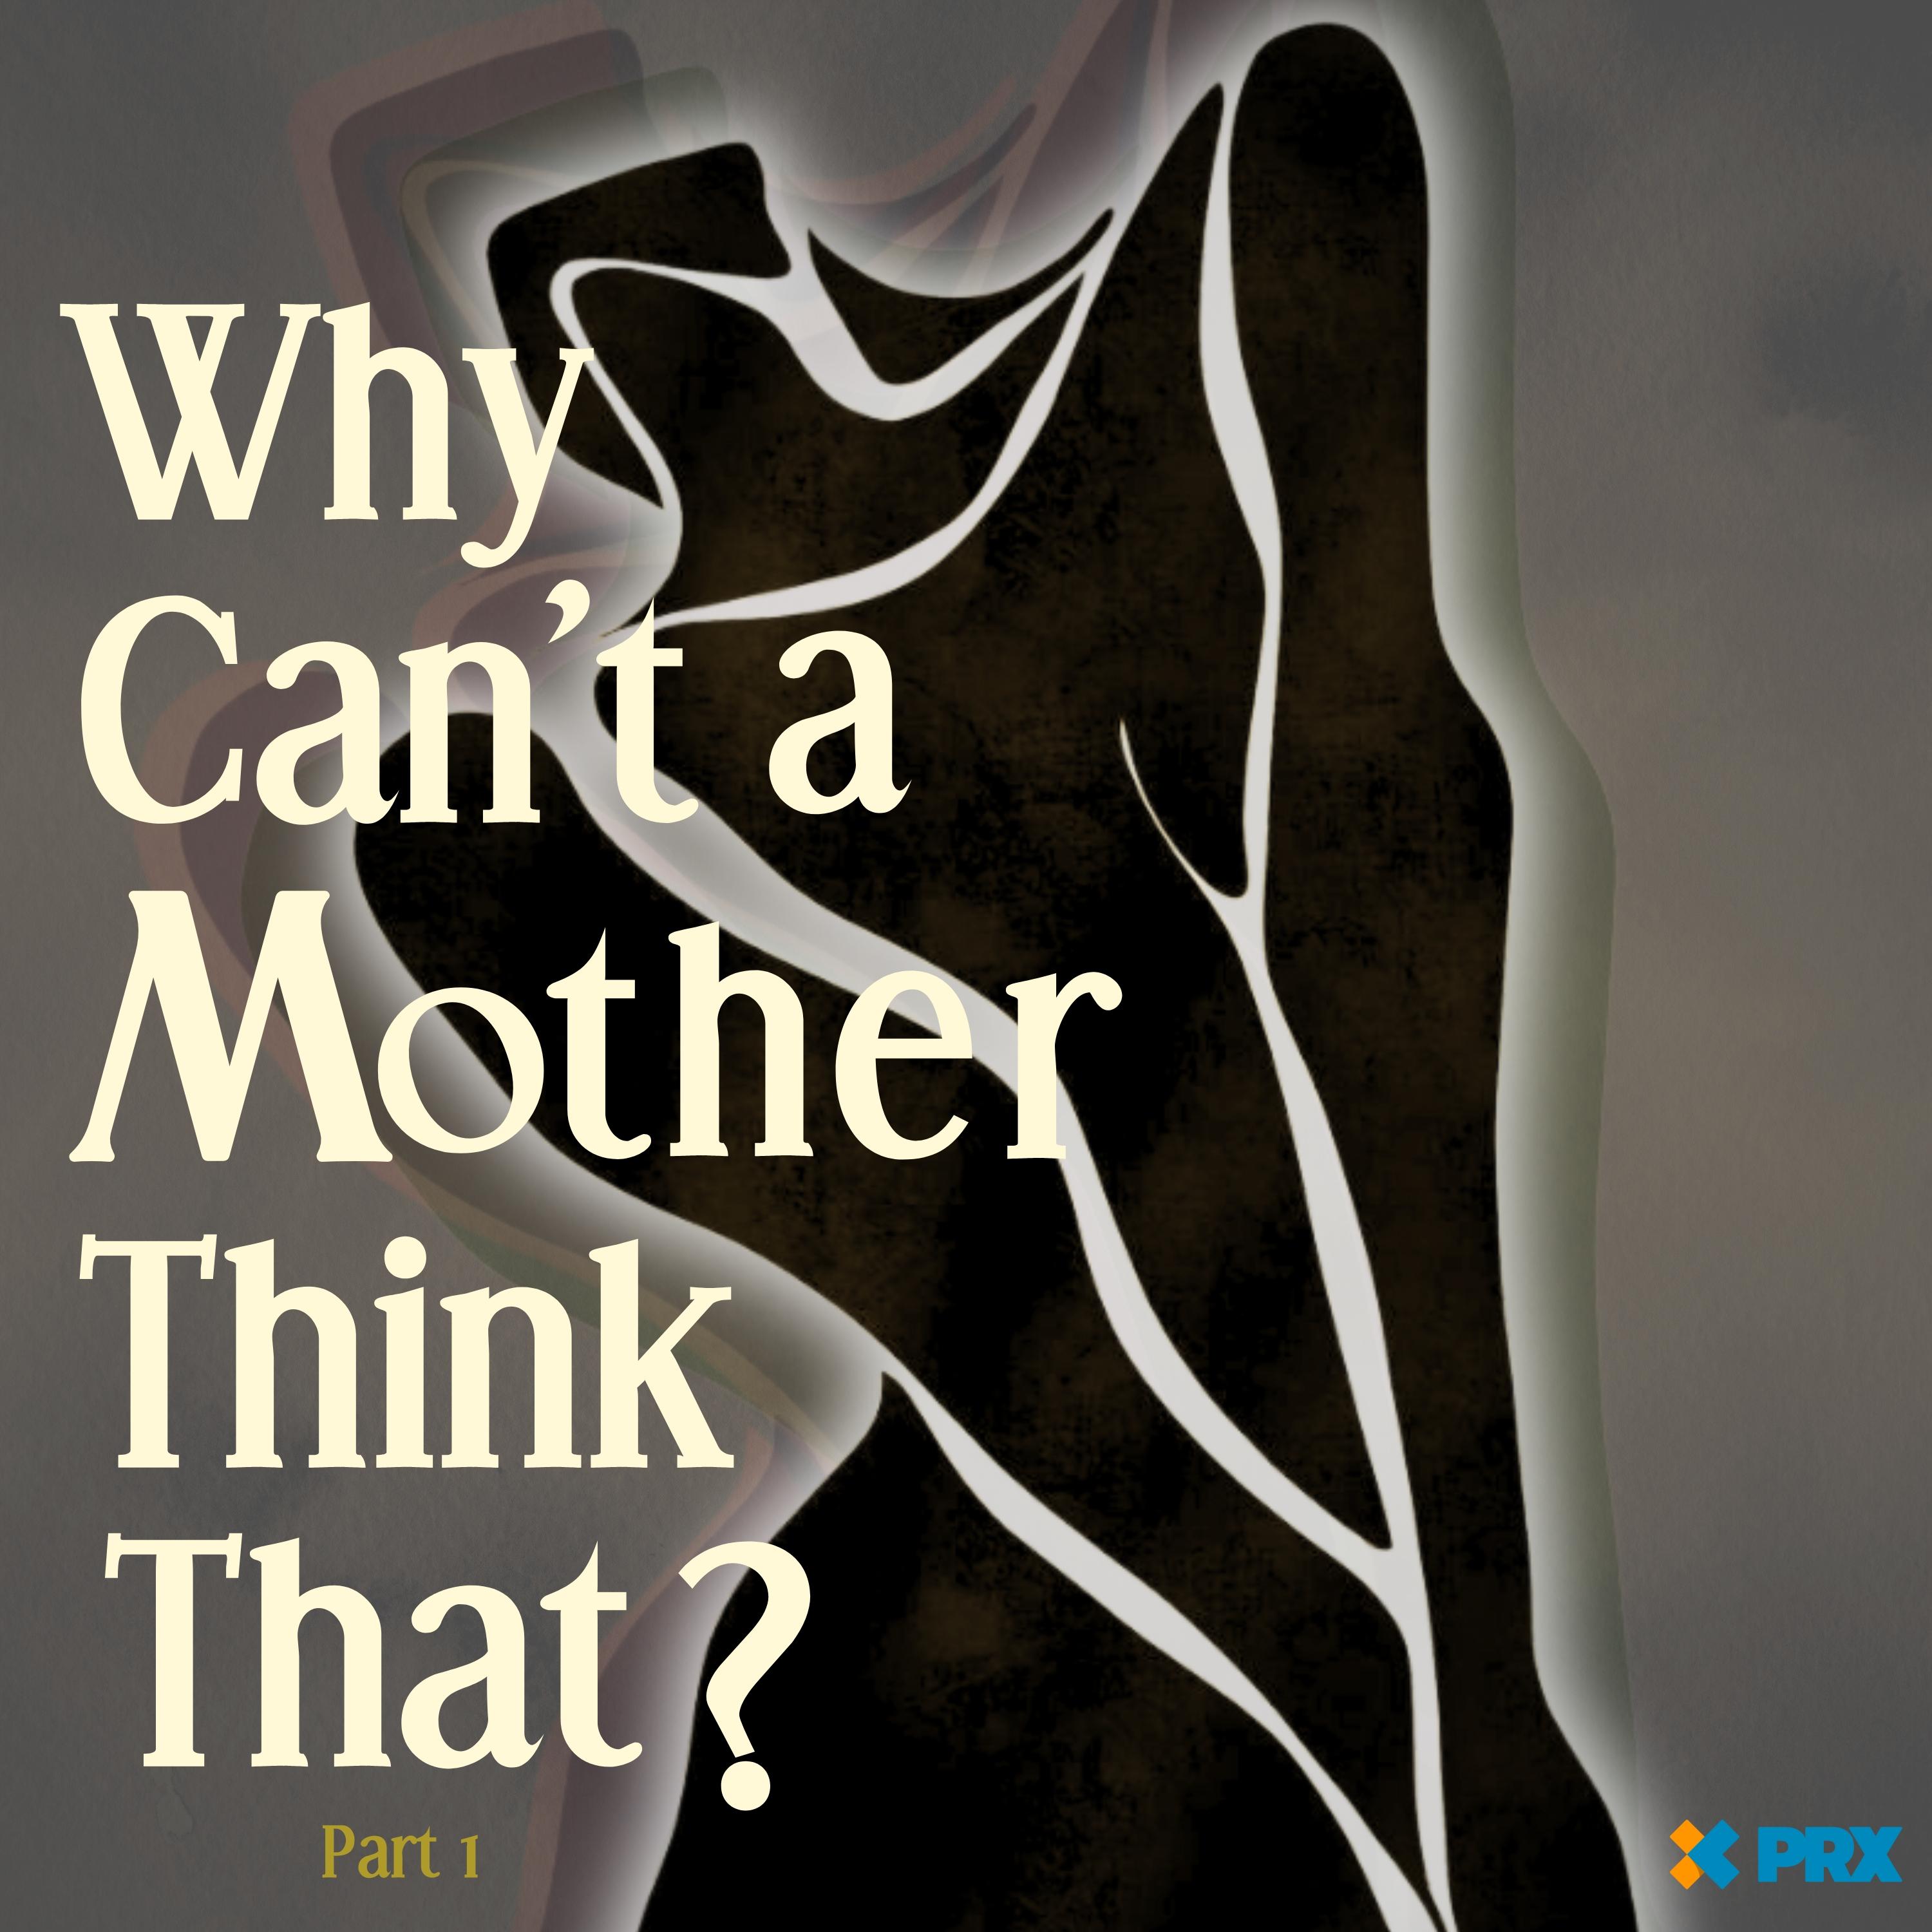 Thumbnail for "Why Can't a Mother Think That? (Anne, Pt. 1)".